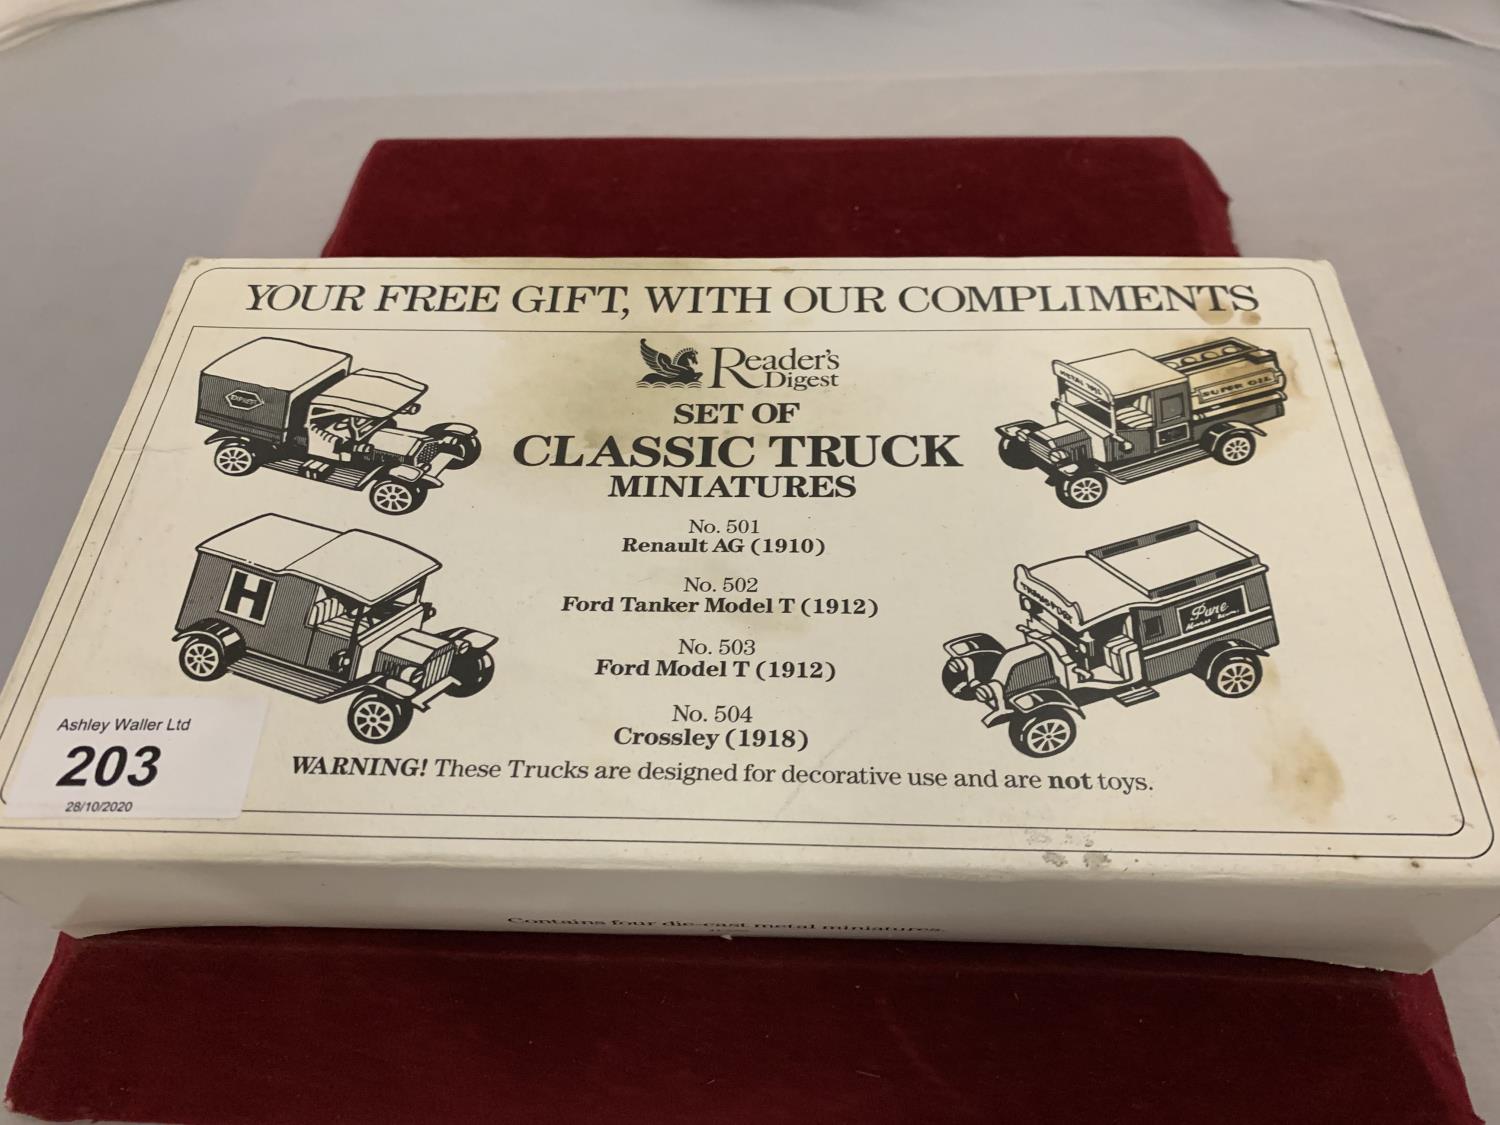 A BOXED SET OF FOUR CLASSIC TRUCK MINATURE MODELS